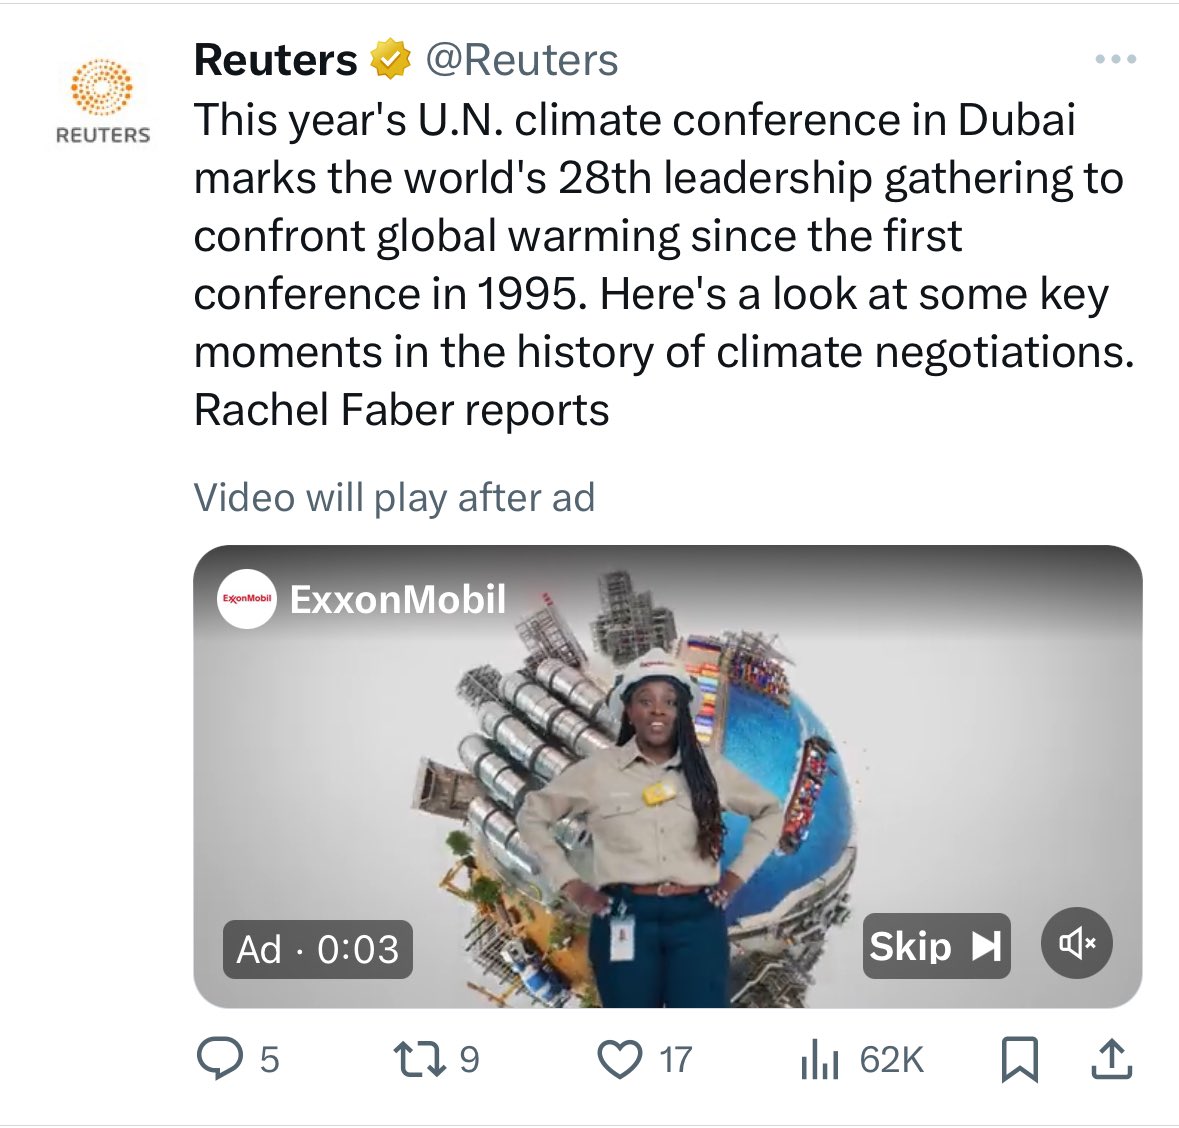 A story about 28 years of failed climate negotiations led by an ad from ExxonMobil, who actively funded efforts to undermine the process, is just... Have some dignity, @Reuters, and ban fossil fuel advertising, starting with your climate coverage.